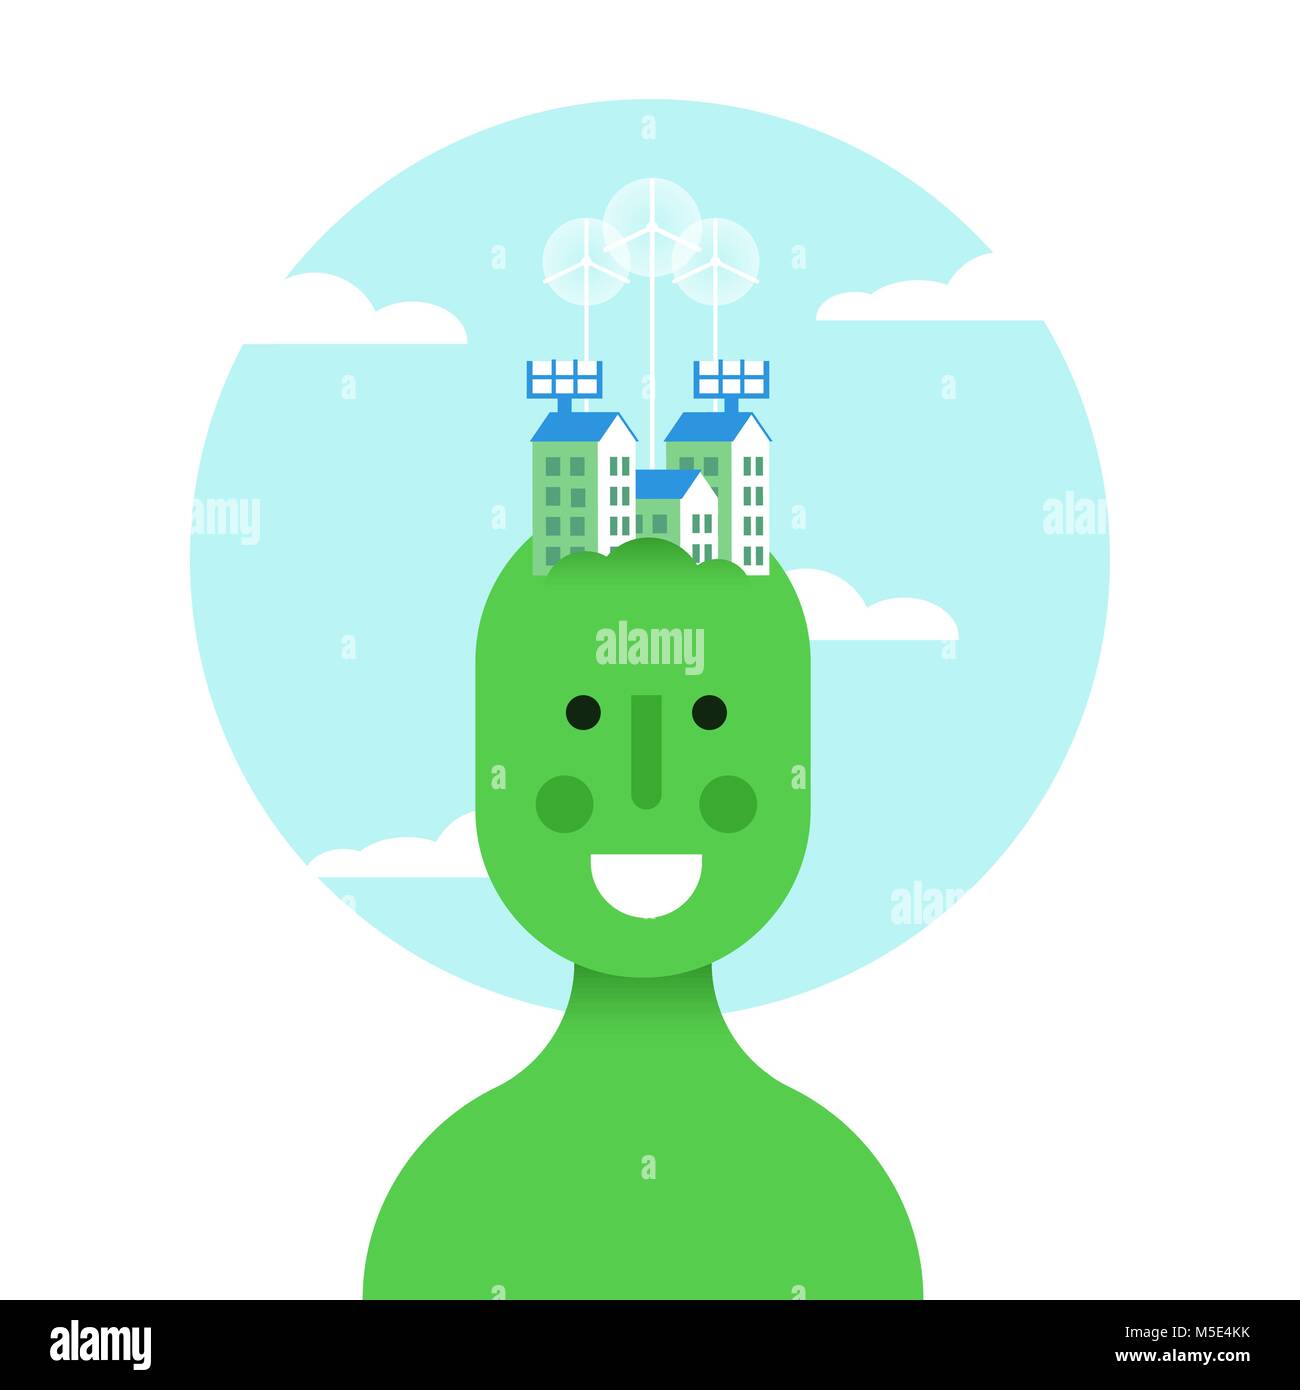 World ecology concept illustration, green man with sustainable city over head. Includes wind turbines, solar panels and houses. EPS10 vector. Stock Vector